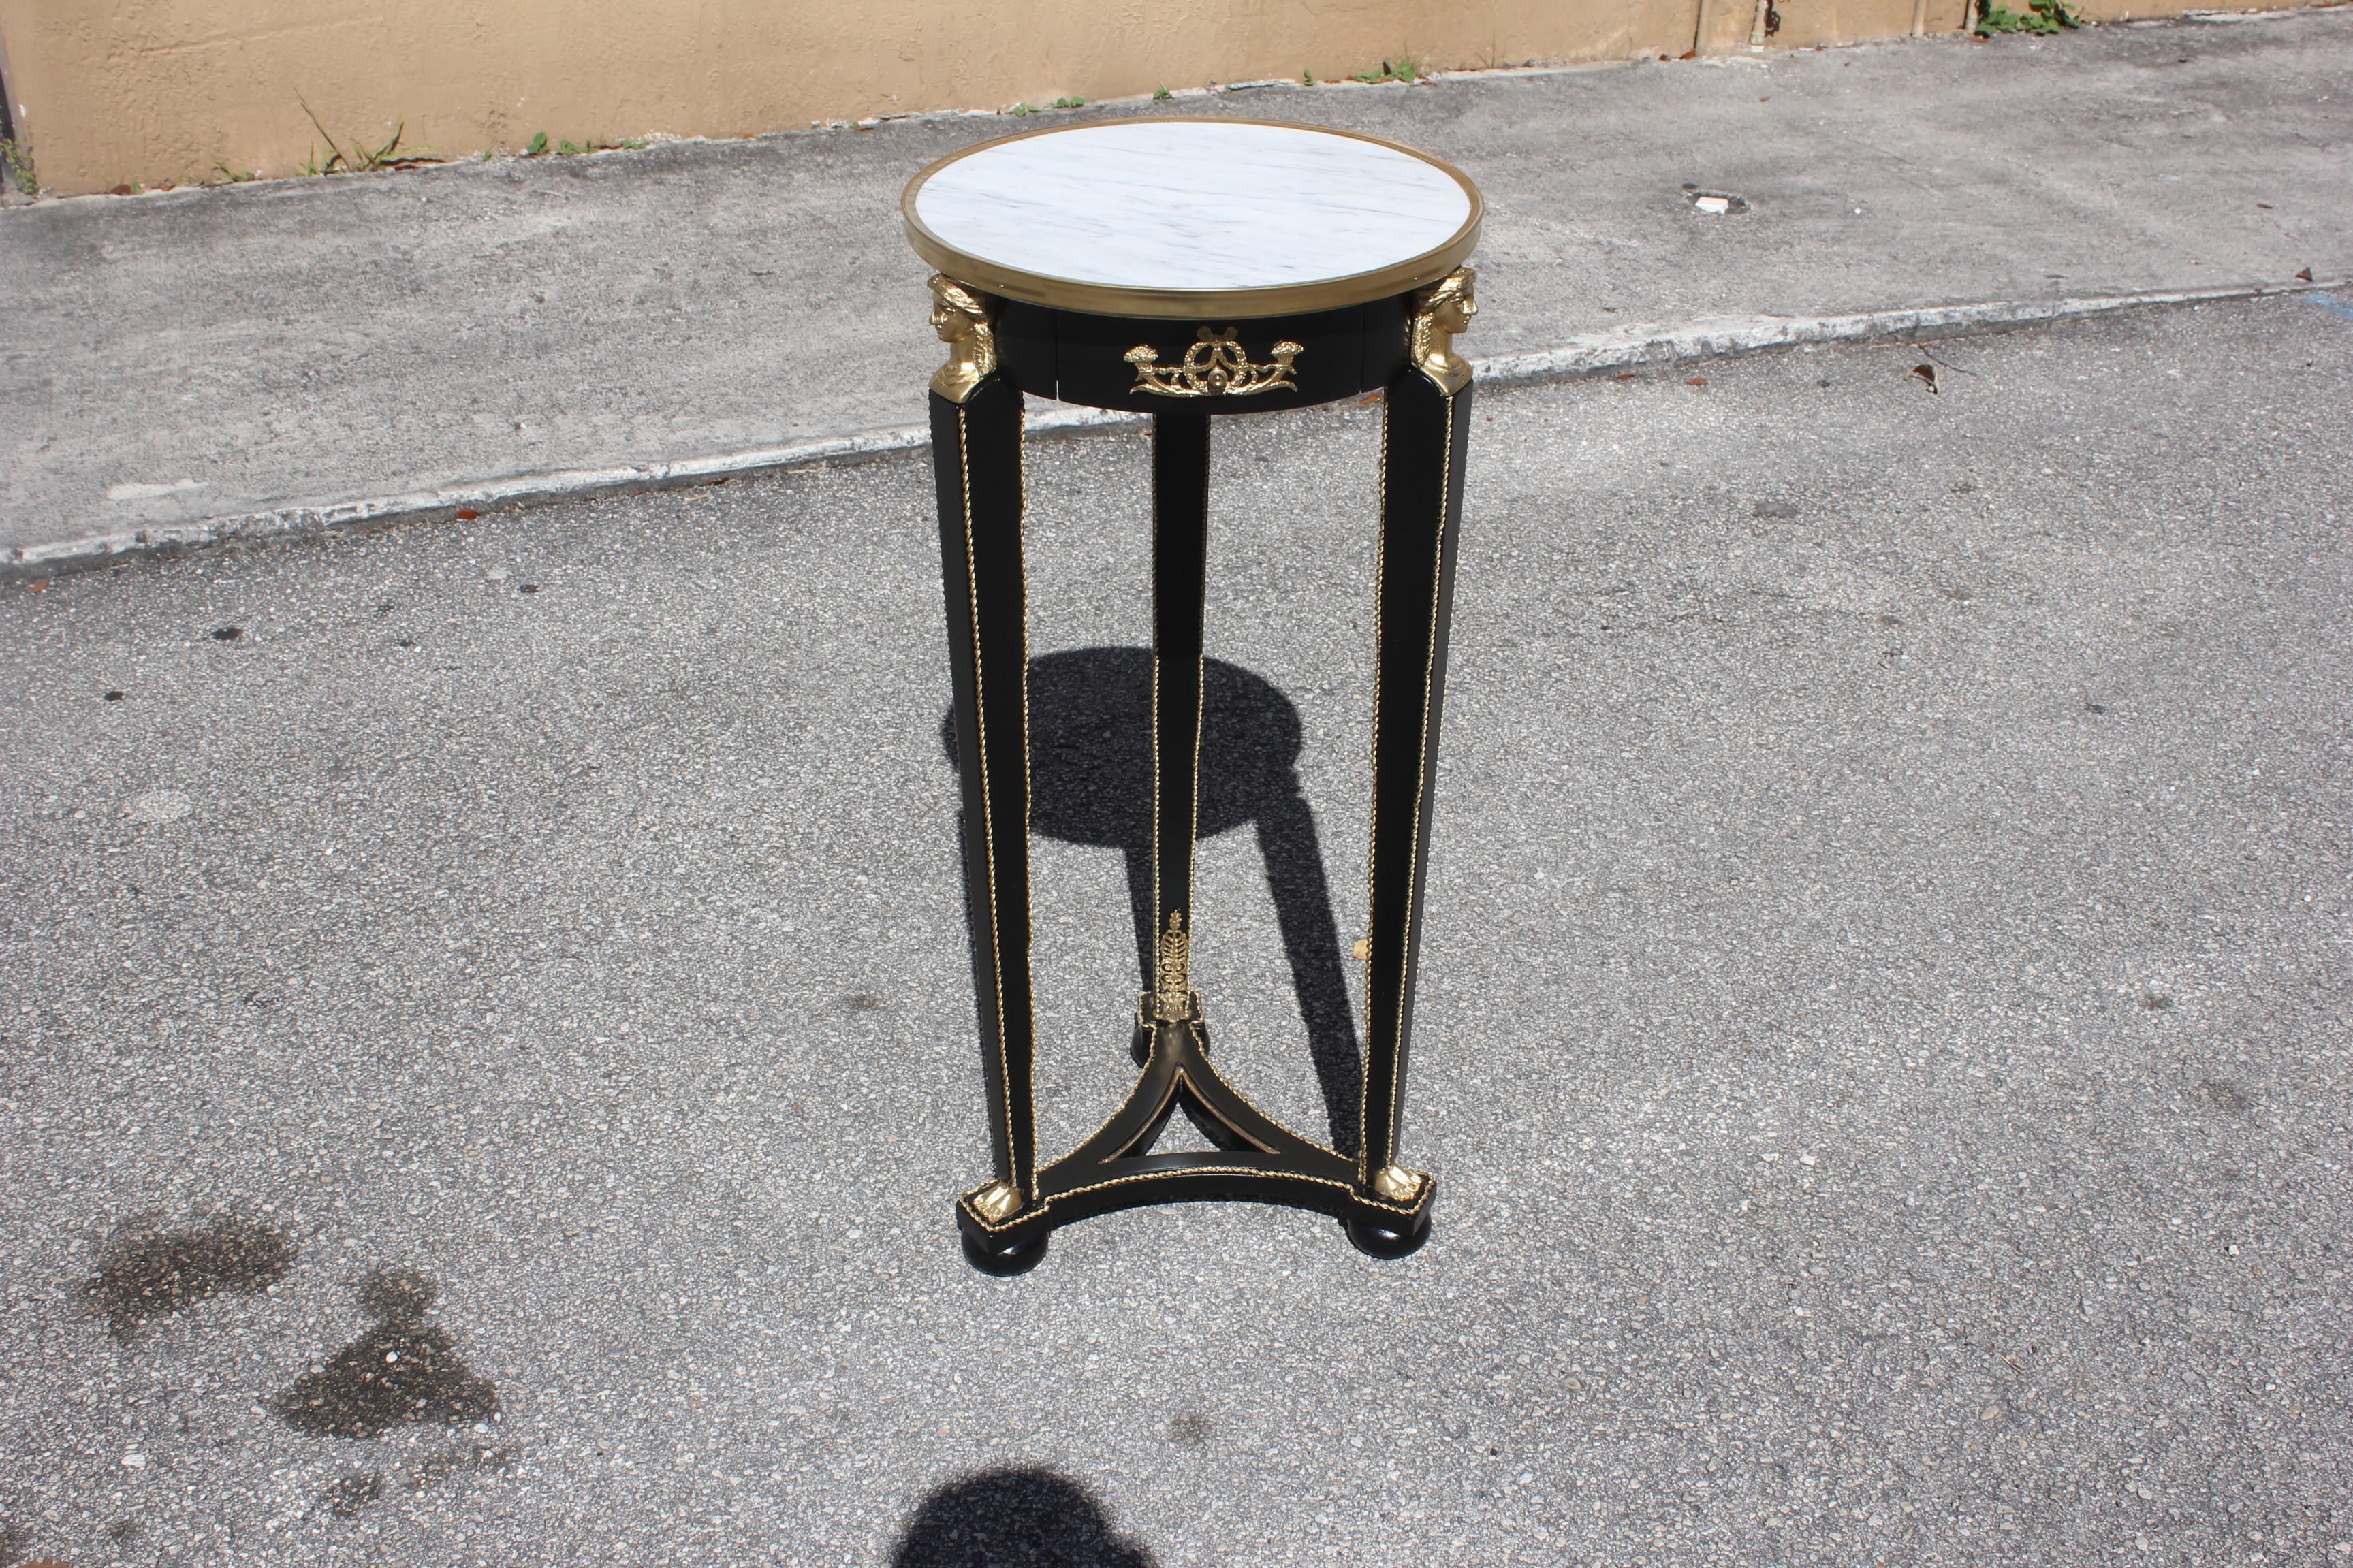 Beautiful French Empire style ebonized period side table or pedestal table marble top, circa 1920s, the table are ebonized with a French lacquer finish, the table have one drawers in the centre, with a ronde marble-top, and very nice bronze hardware